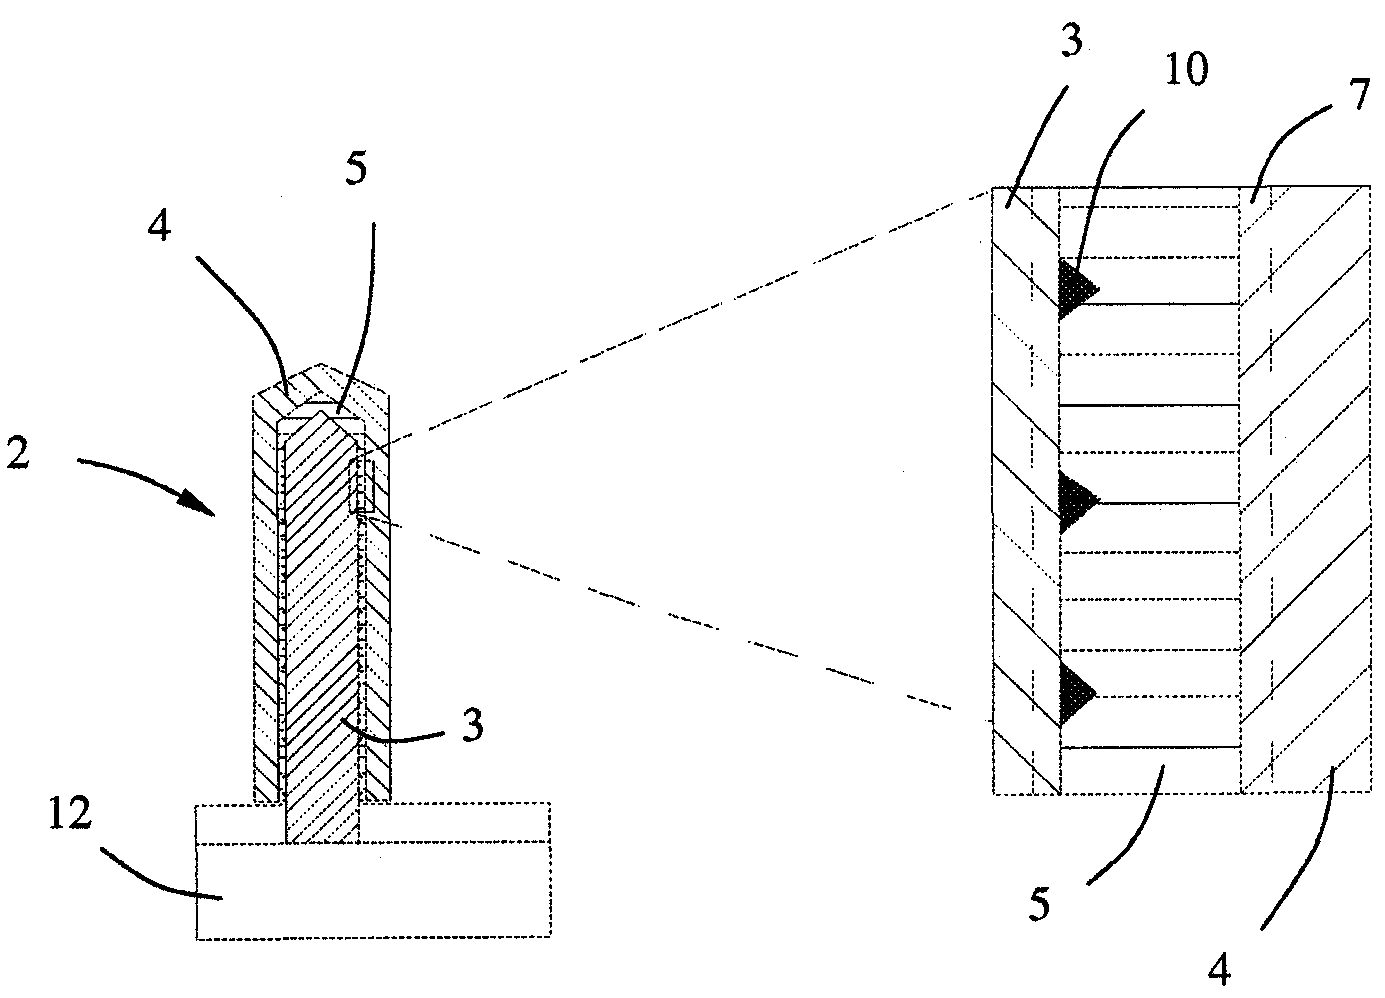 Optoelectronic semiconductor device